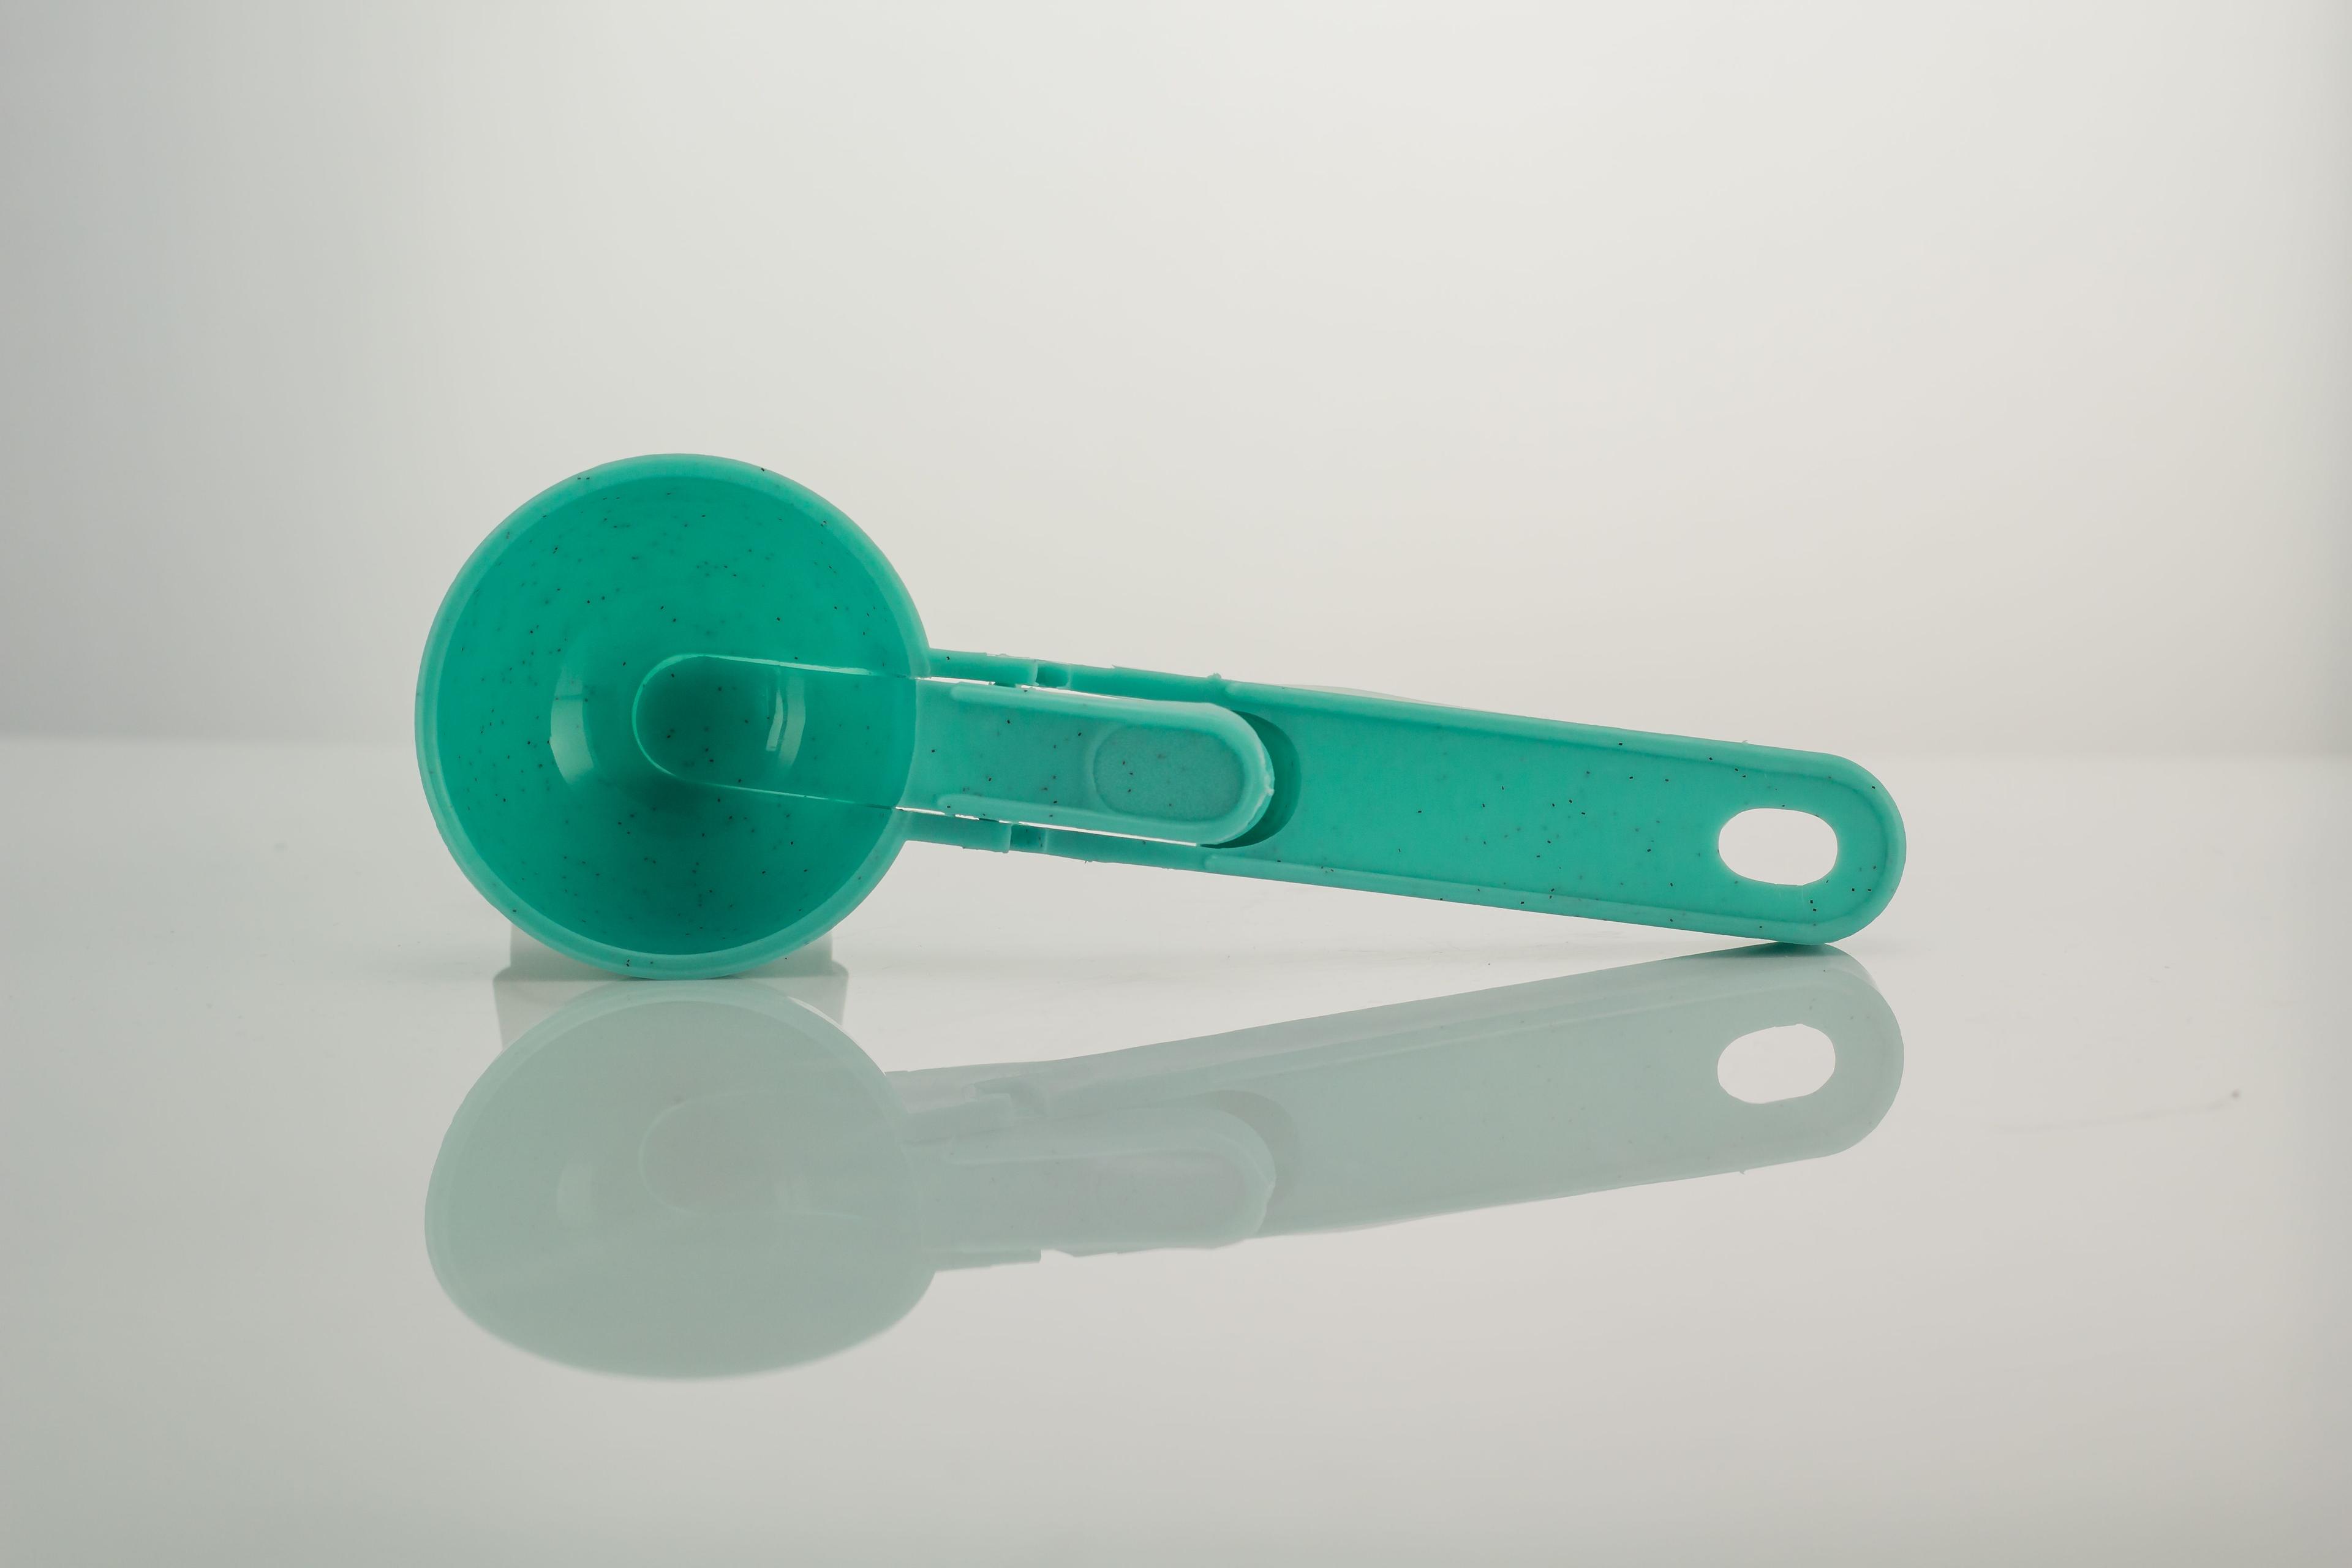 Dish spoon, for forming balls, POLISH PRODUCT